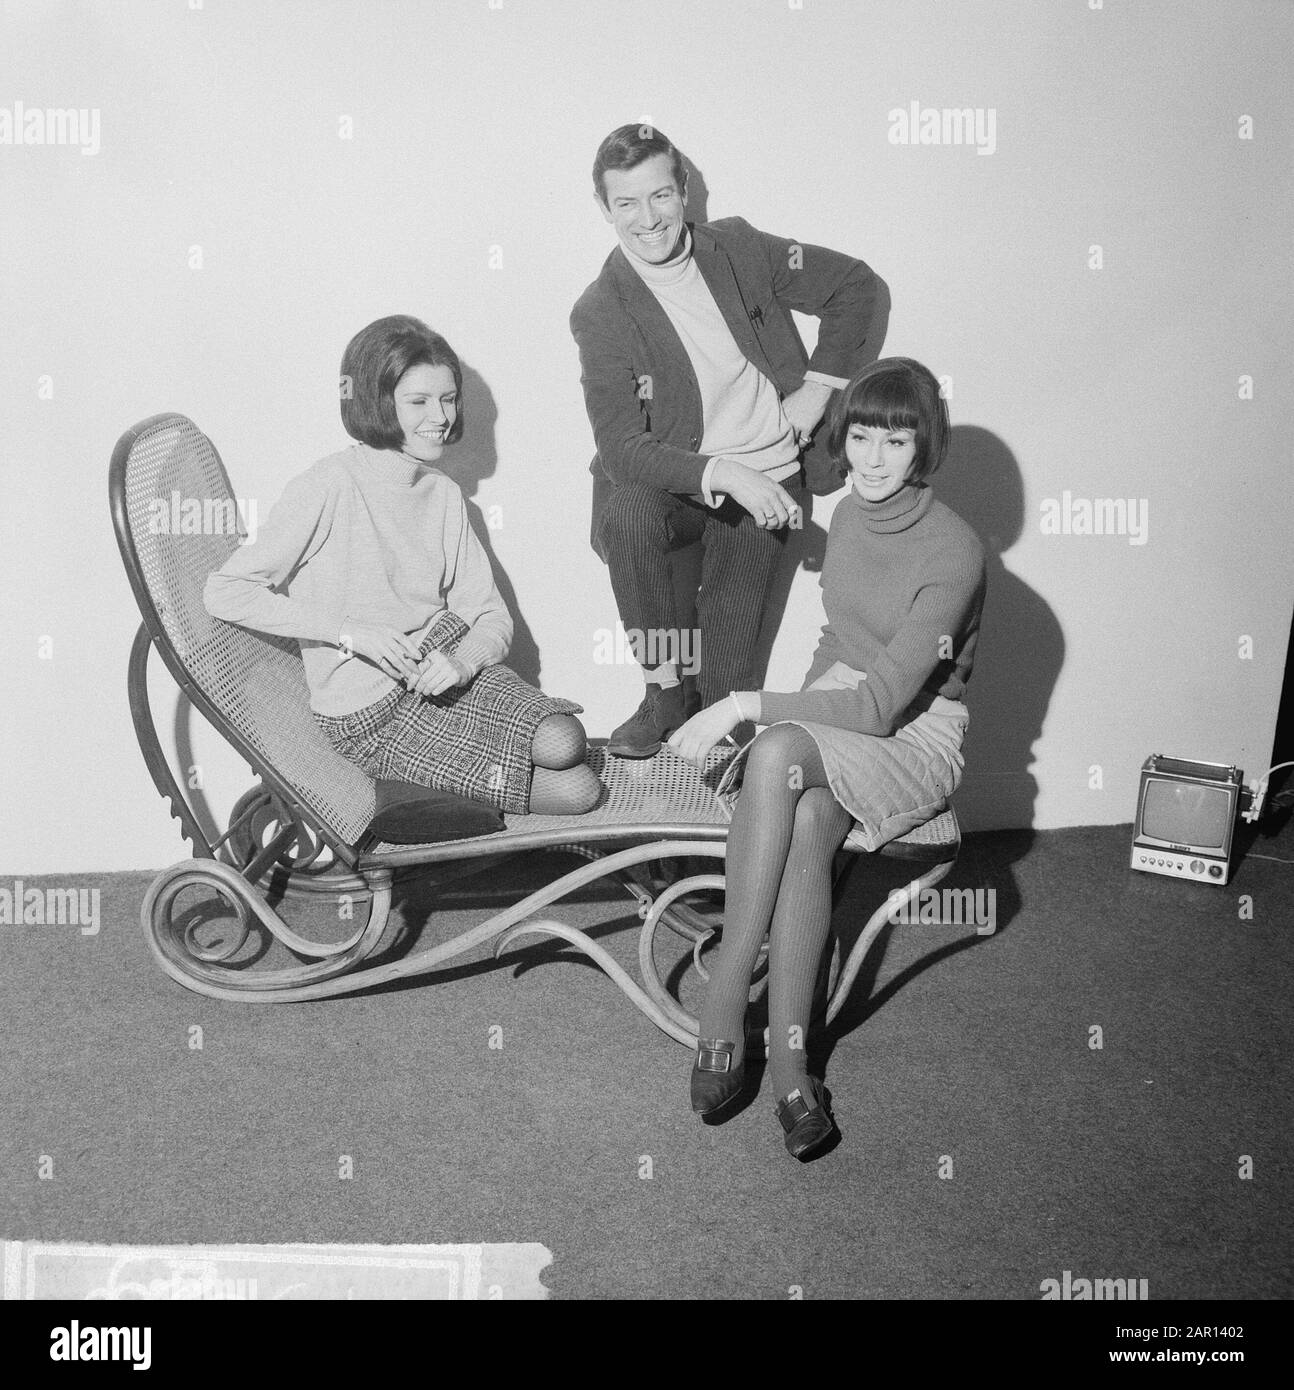 Task Telegraph Annotation: Two young women on a wicker resting chair with a man in the middle. On the right you can see a mini television Date: 28 January 1965 Institution name: Telegraph Stock Photo